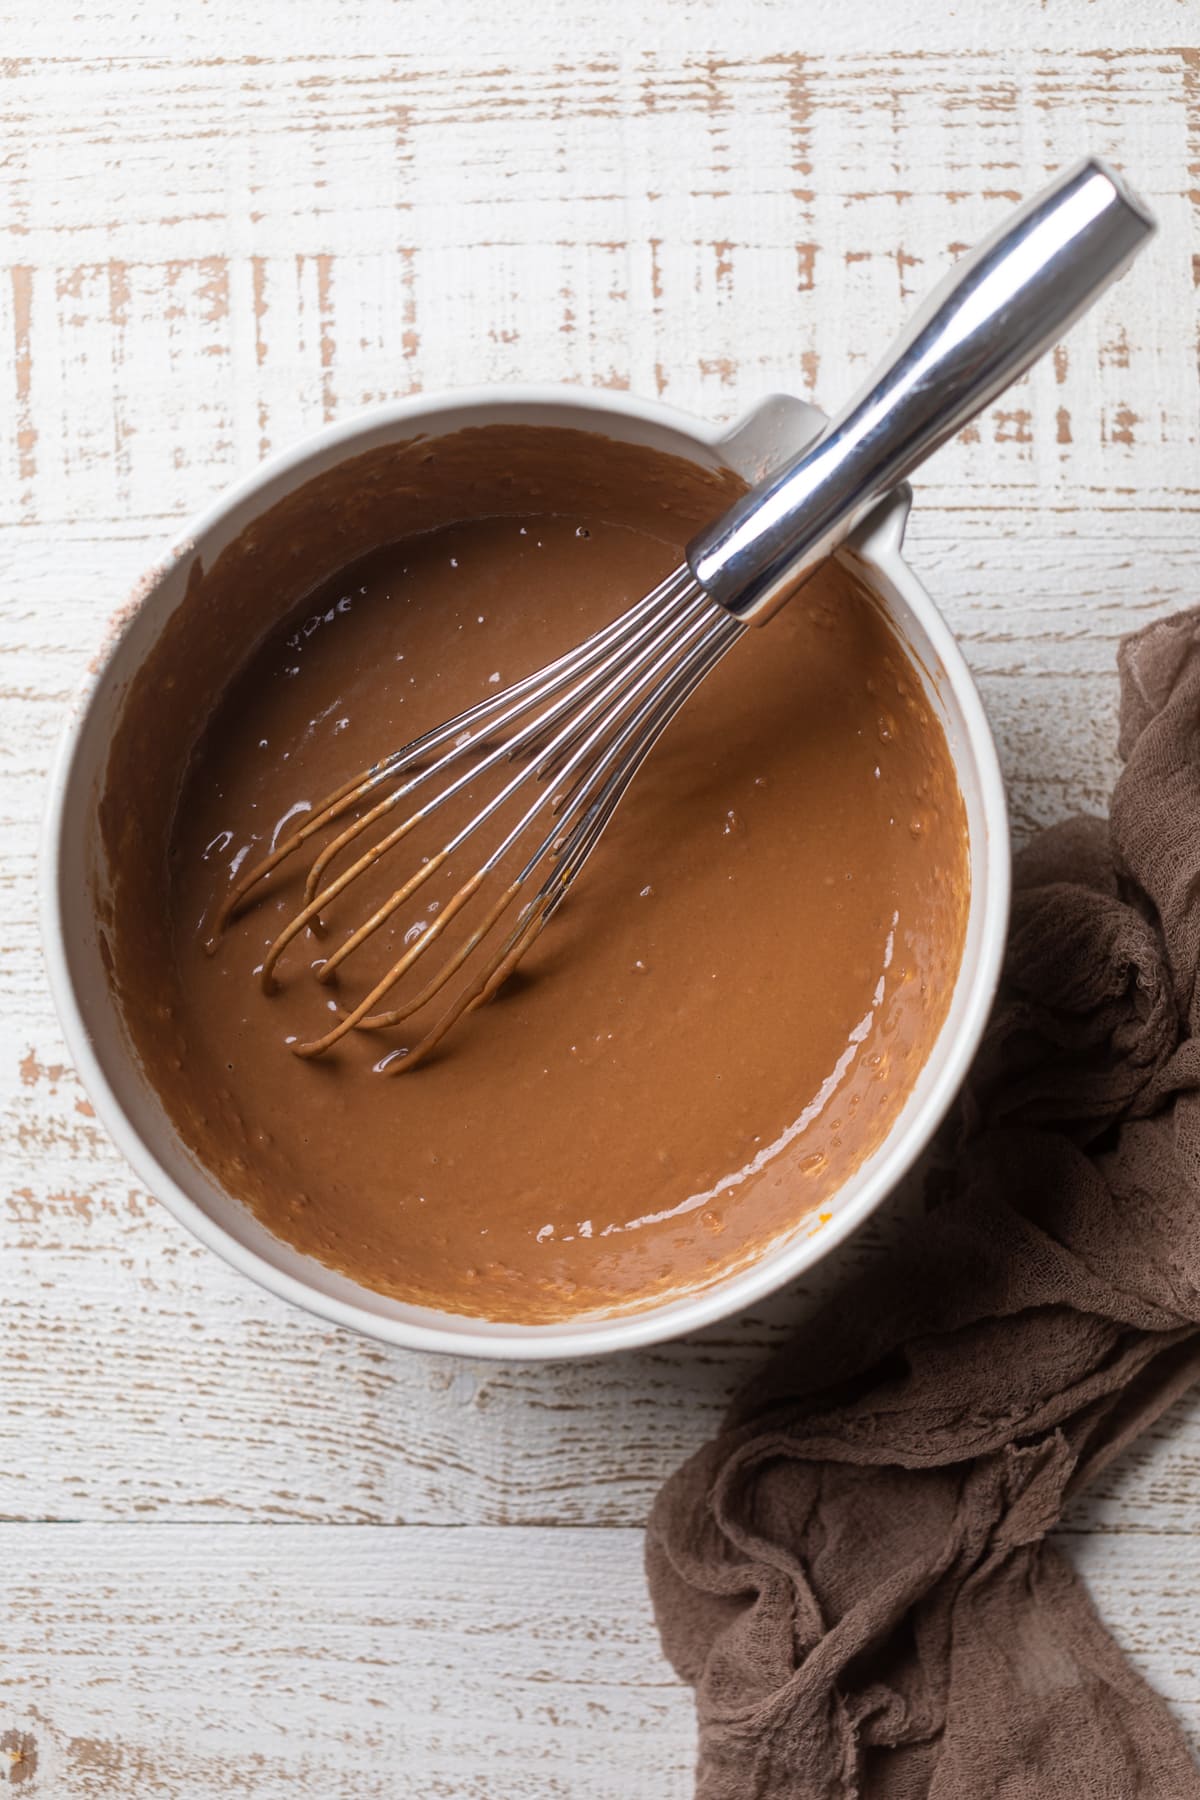 Whisk in a bowl of chocolate glaze